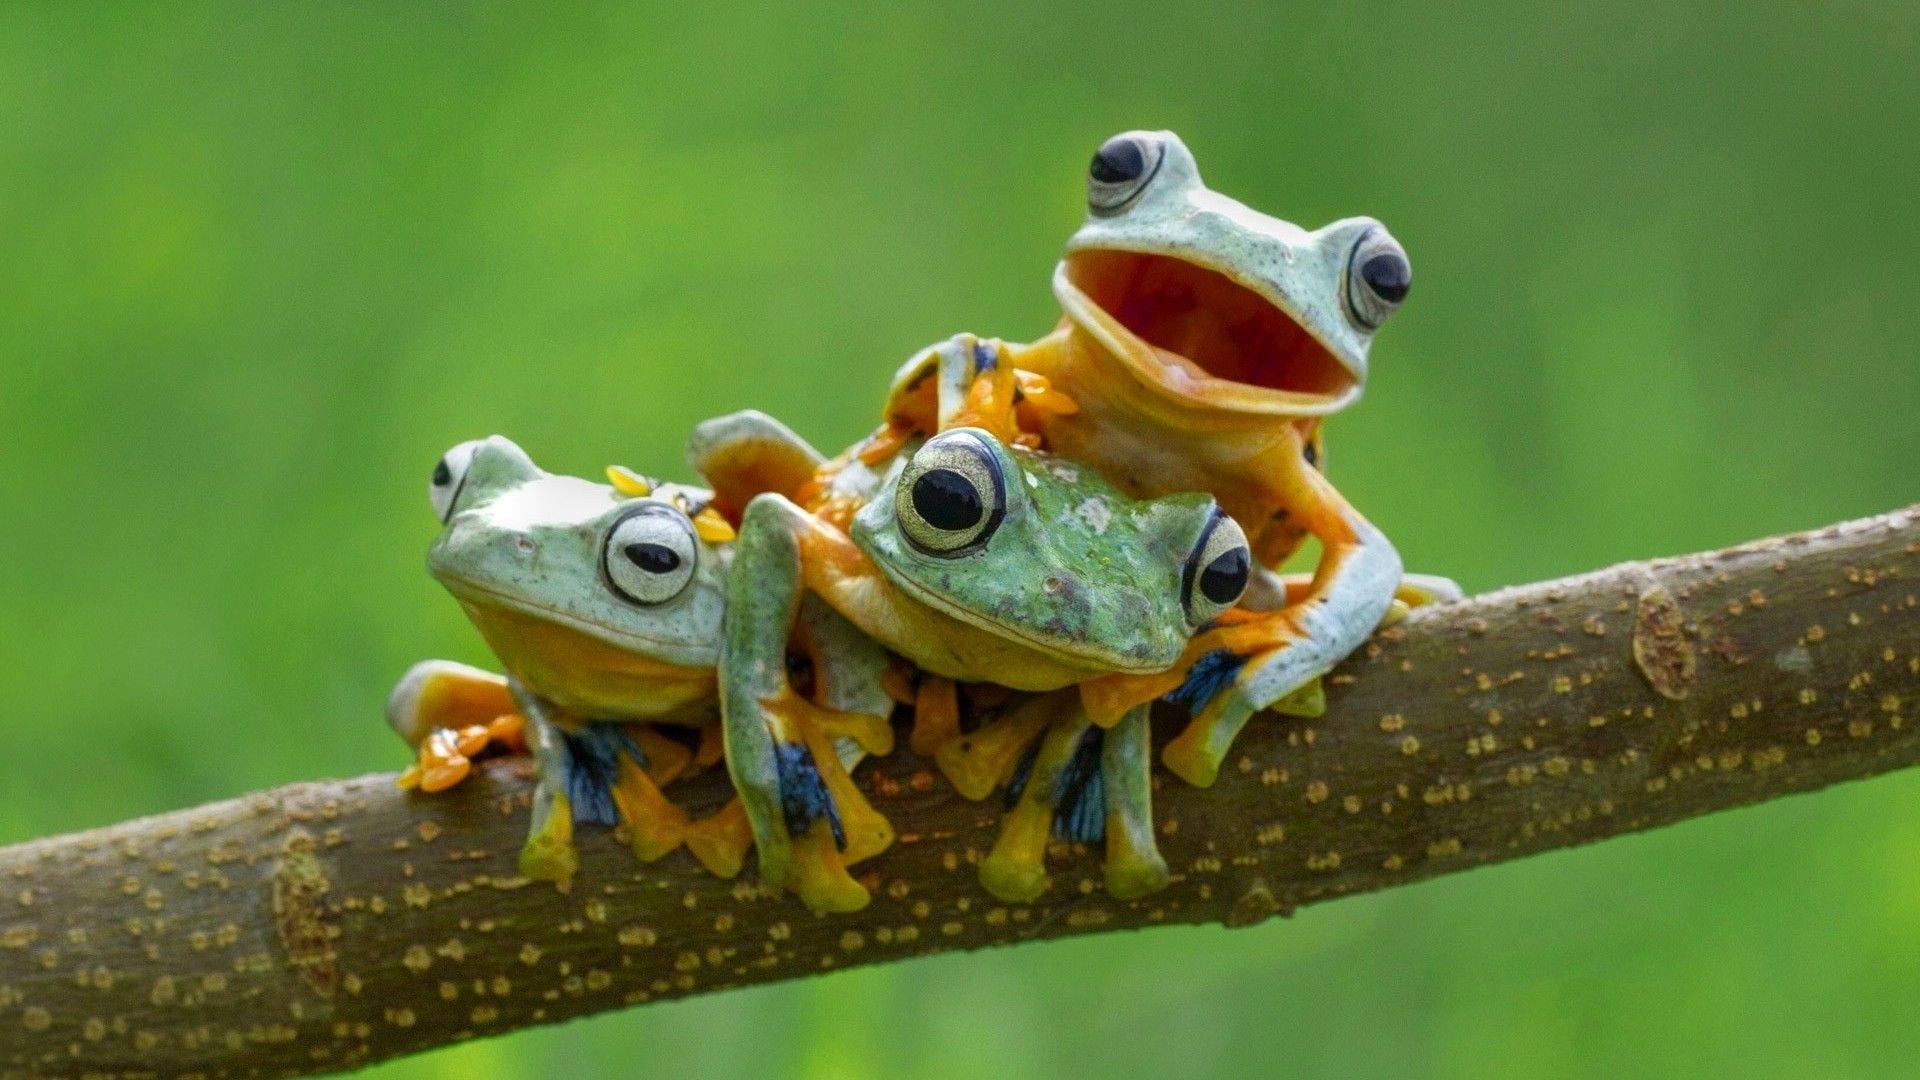 Download Frogs wallpapers for mobile phone free Frogs HD pictures